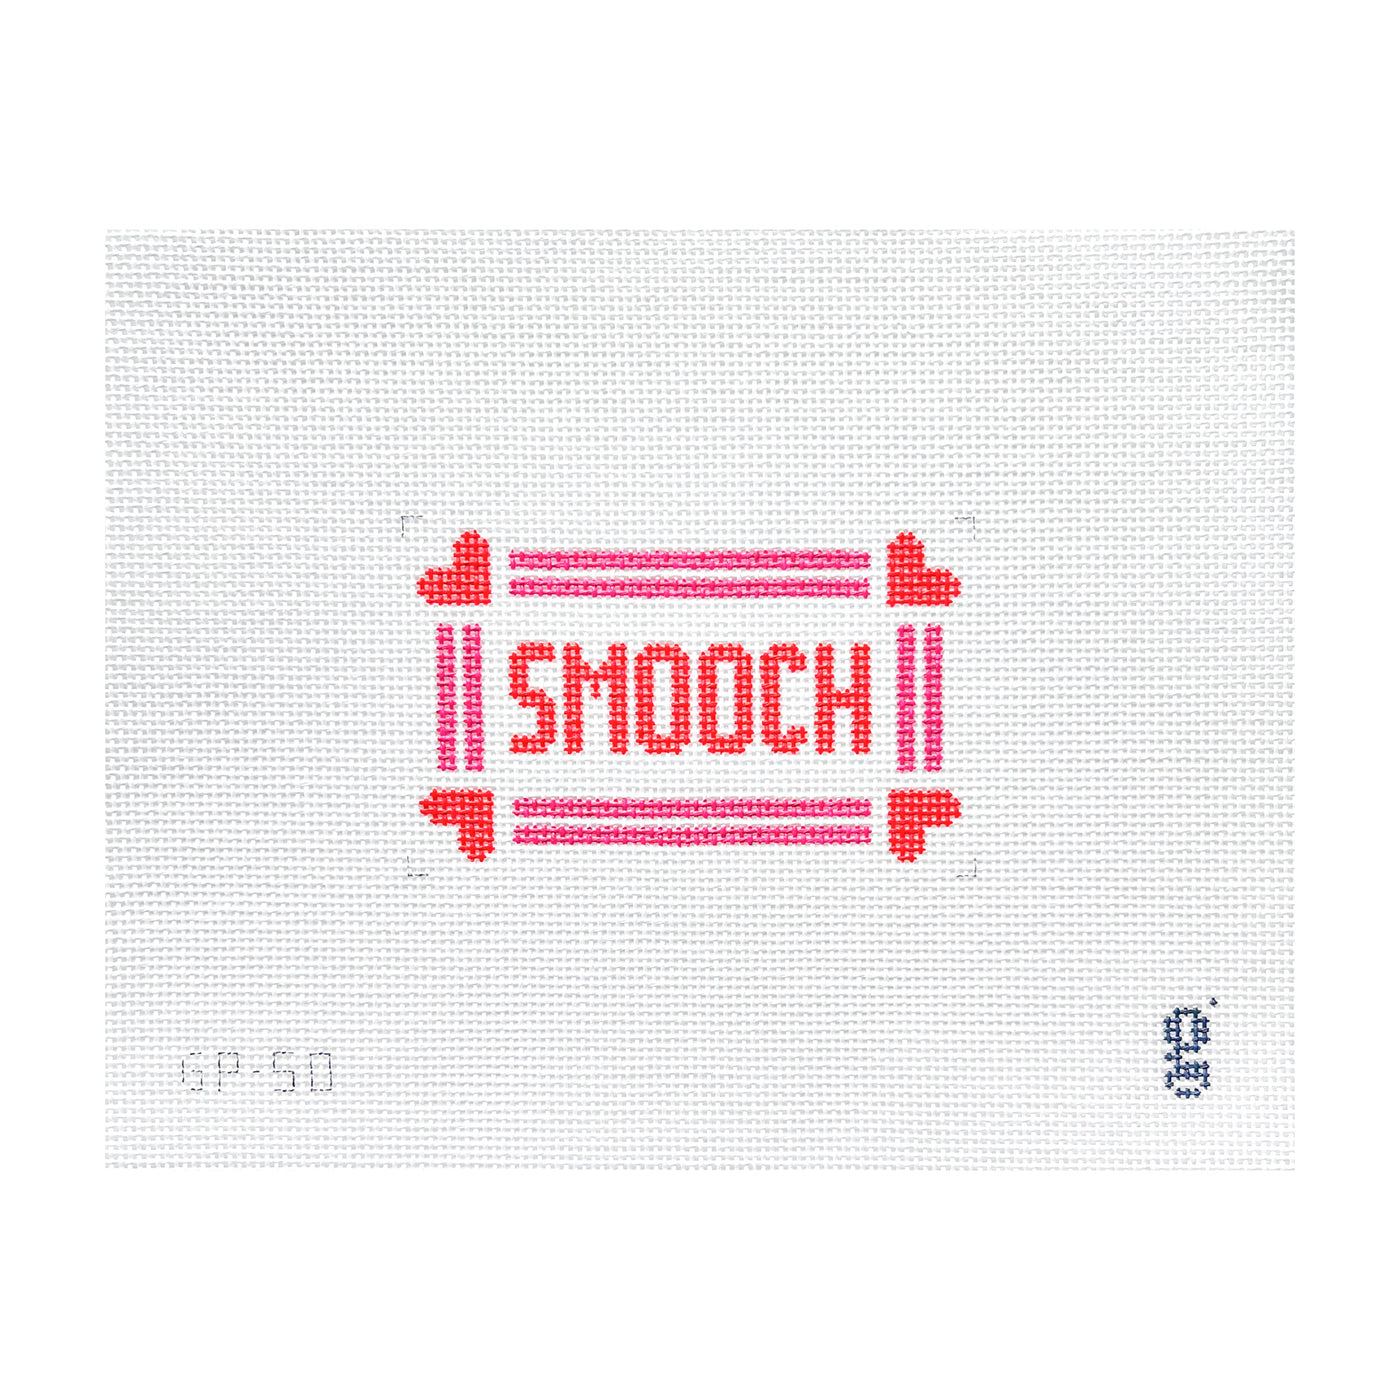 White needlepoint canvas with the word "SMOOCH" in red block text at center. Surrounding the text is a hot pink striped border with a red heart in each corner.